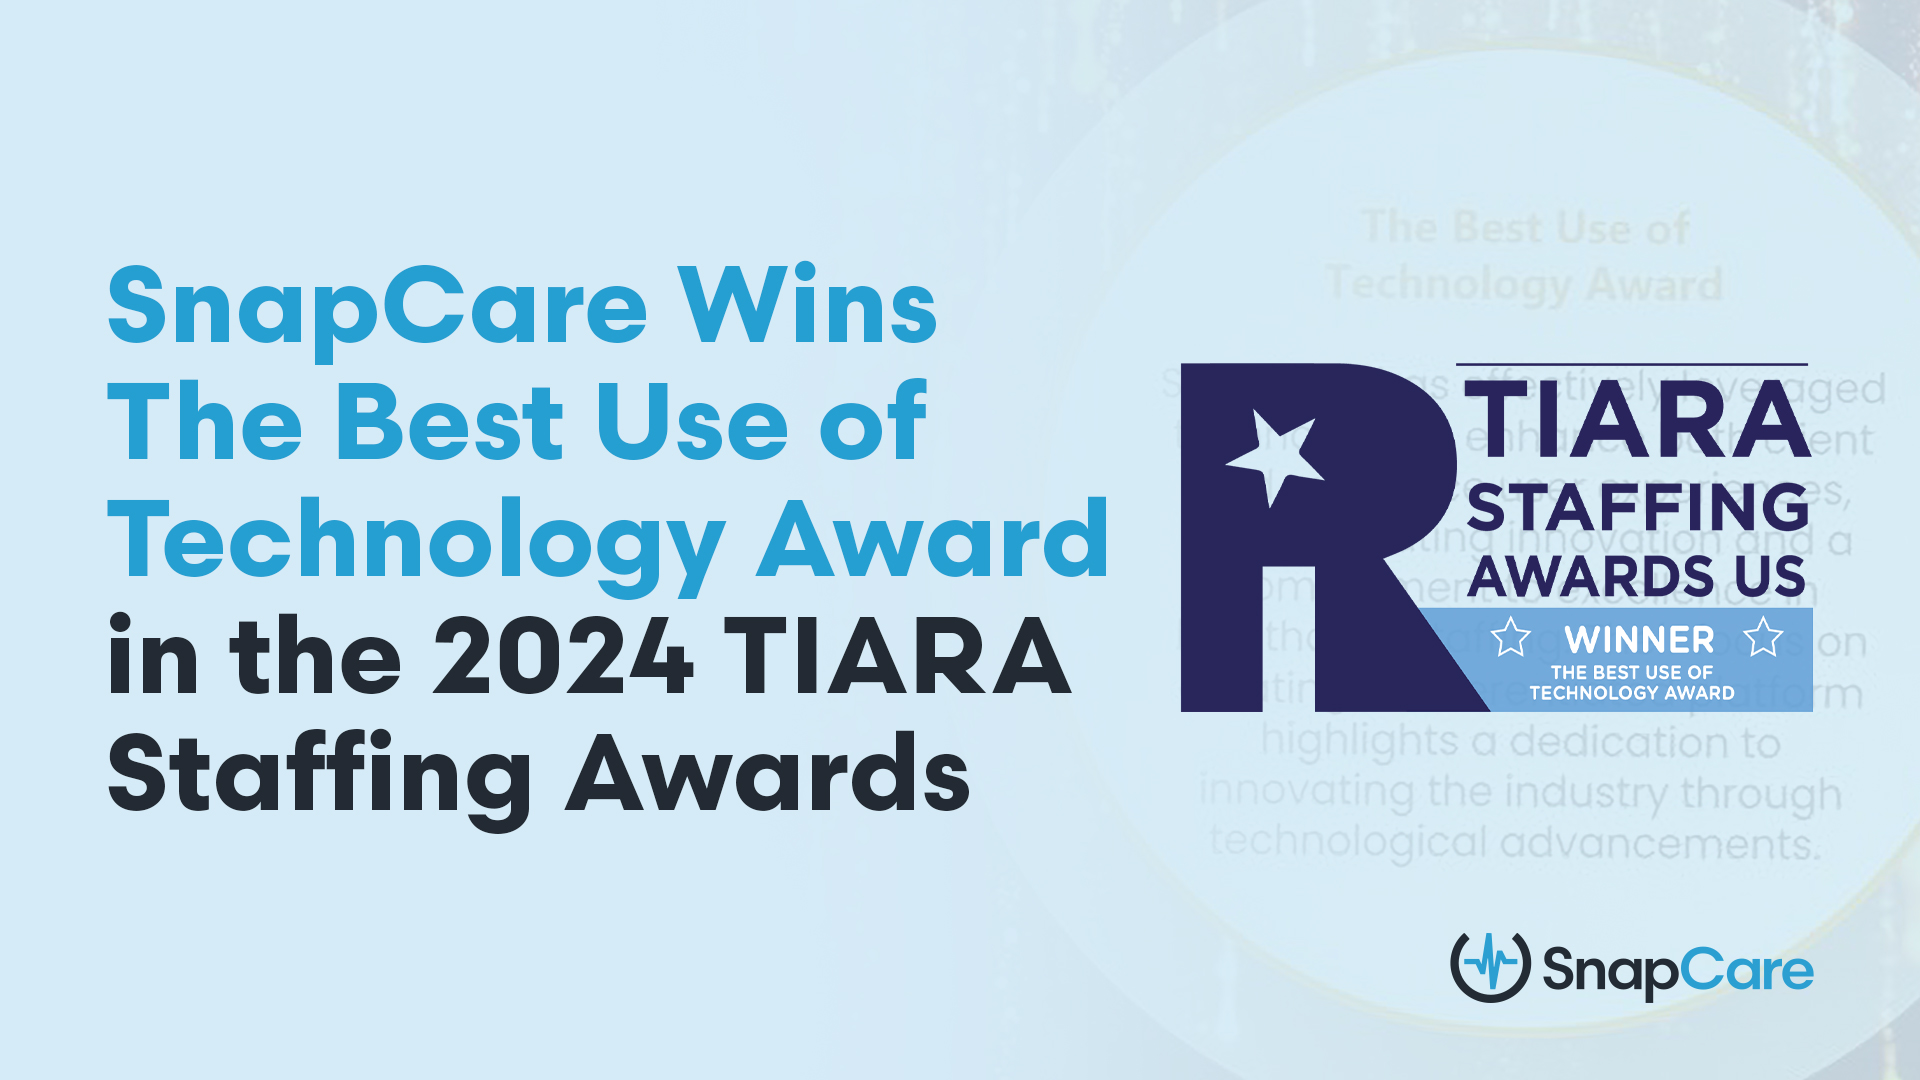 SnapCare Wins The Best Use of Technology Award in the 2024 TIARA Staffing Awards